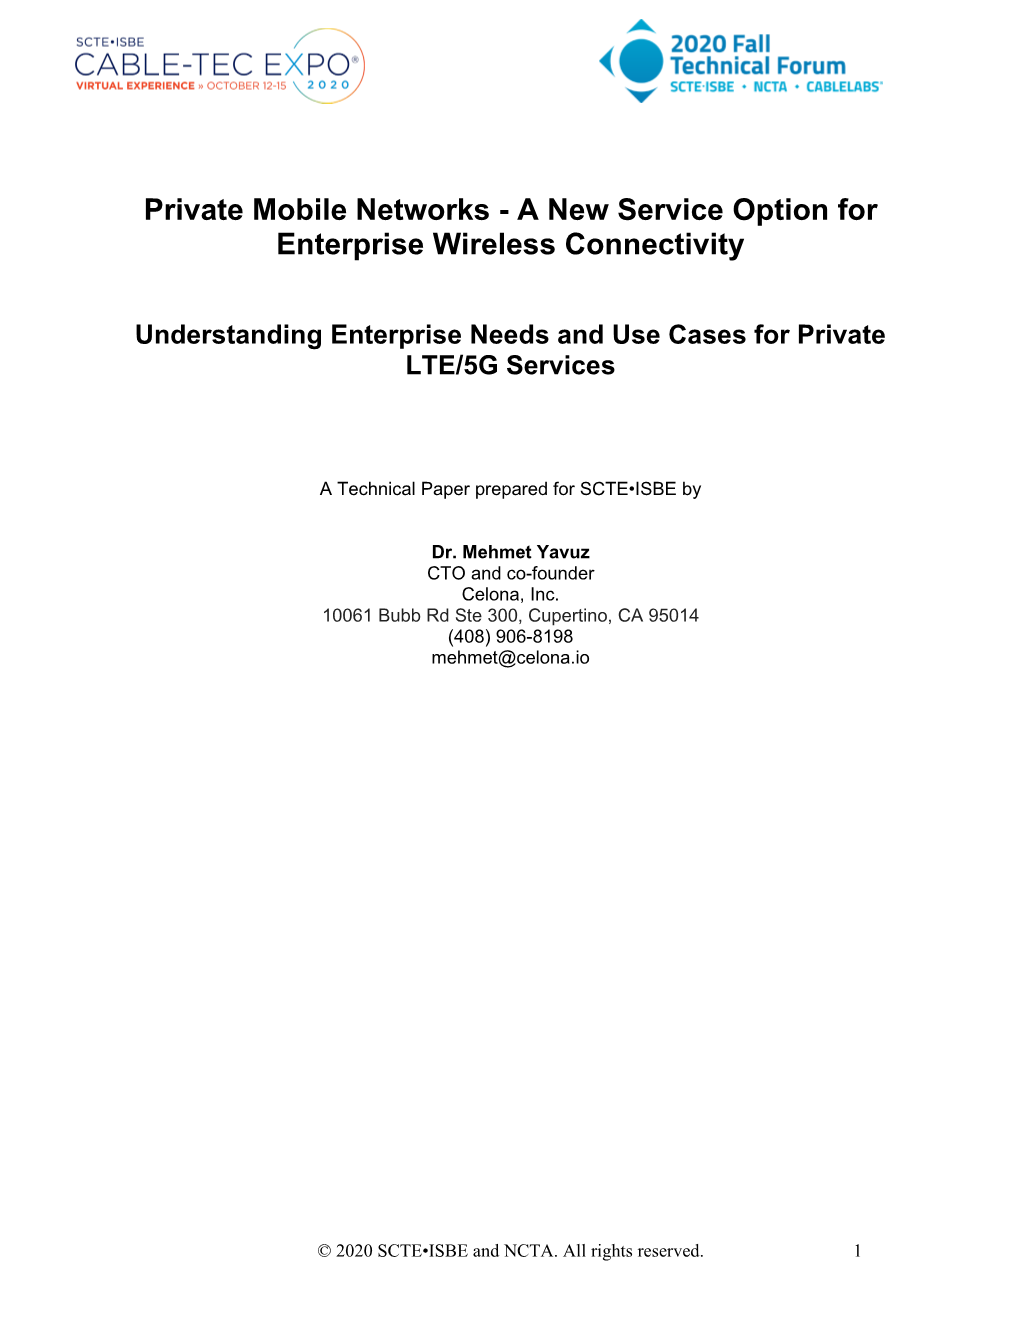 Private Mobile Networks - a New Service Option for Enterprise Wireless Connectivity